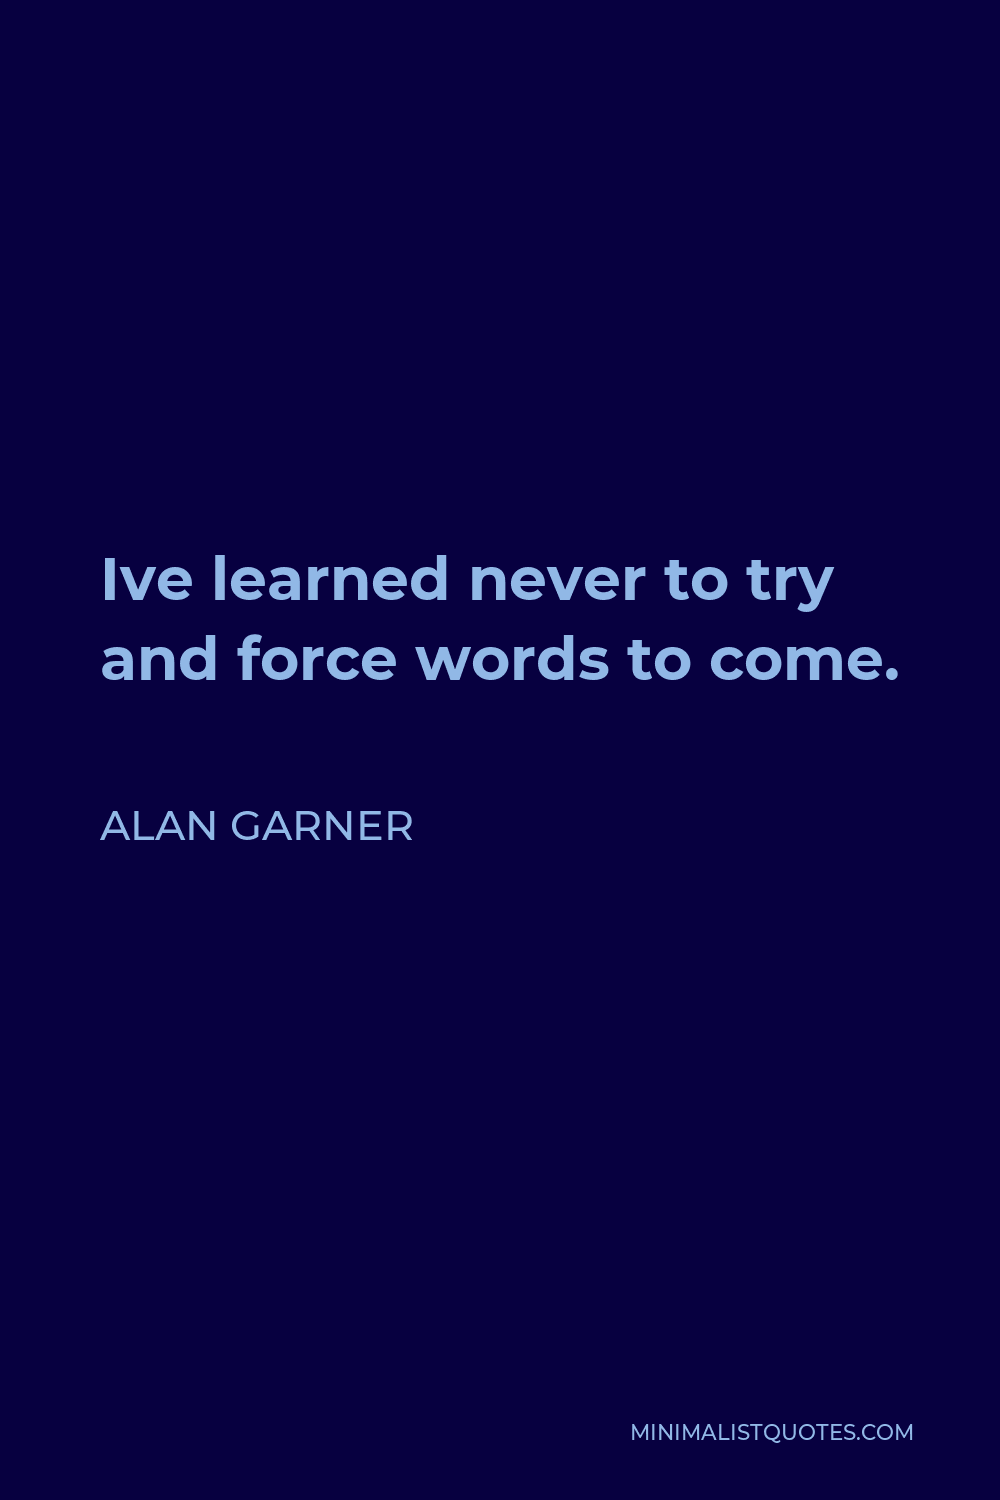 Alan Garner Quote - Ive learned never to try and force words to come.